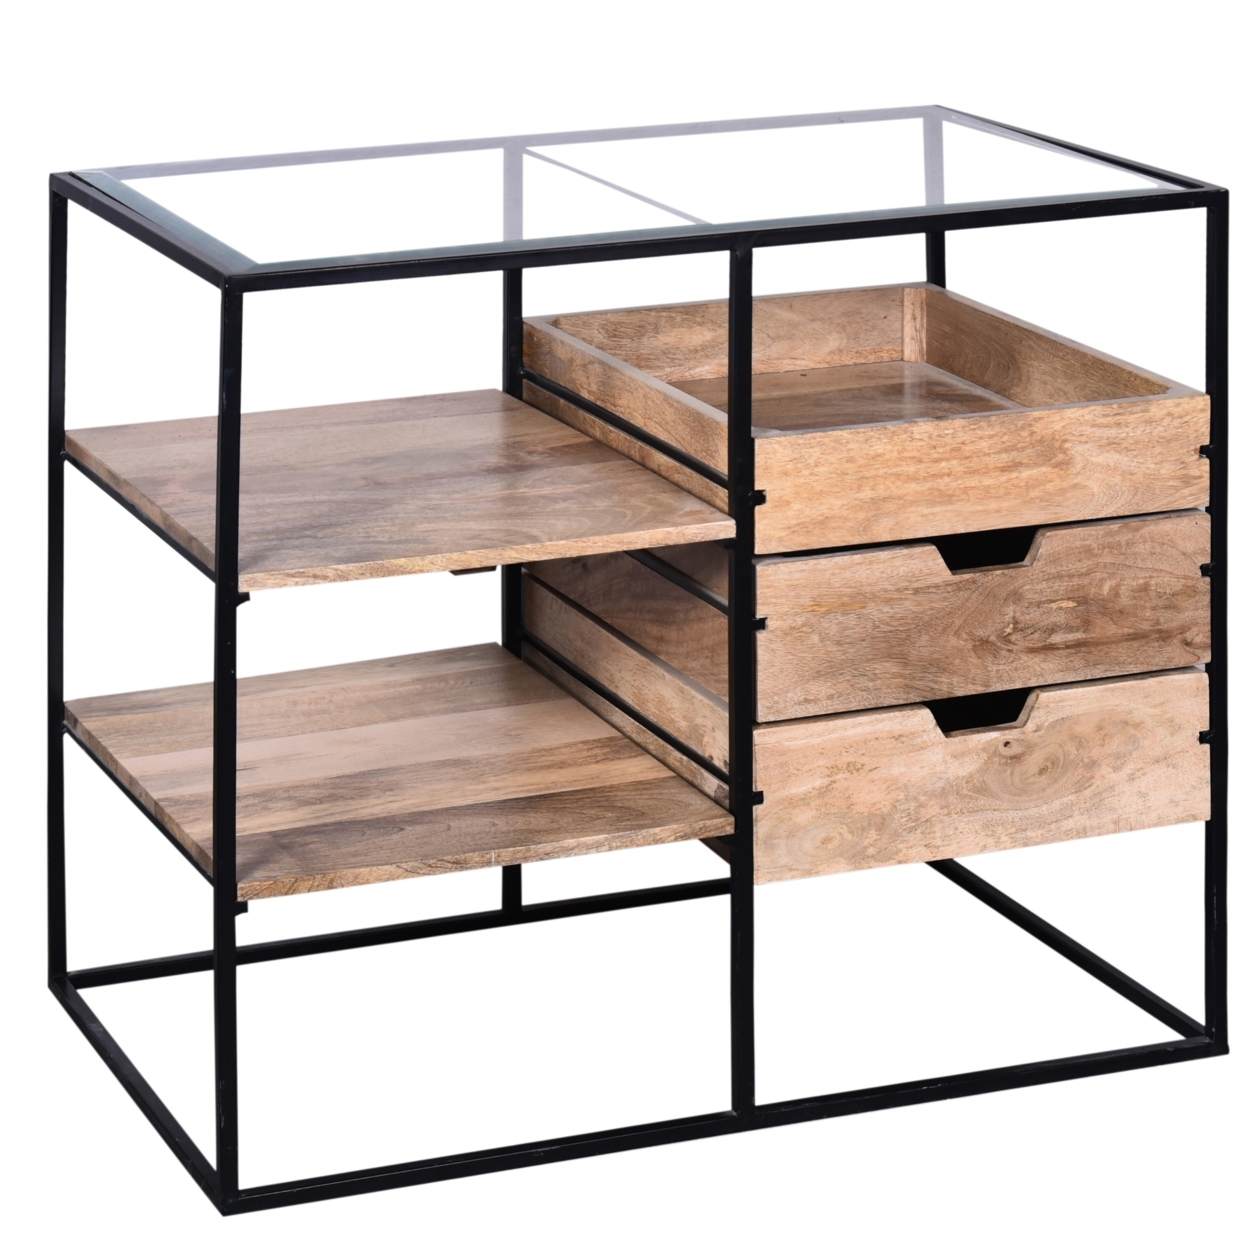 35 Inch Handcrafted Modern Glass Table, Storage Shelves, 3 Drawers, Metal Frame, Natural Brown And Black- Saltoro Sherpi